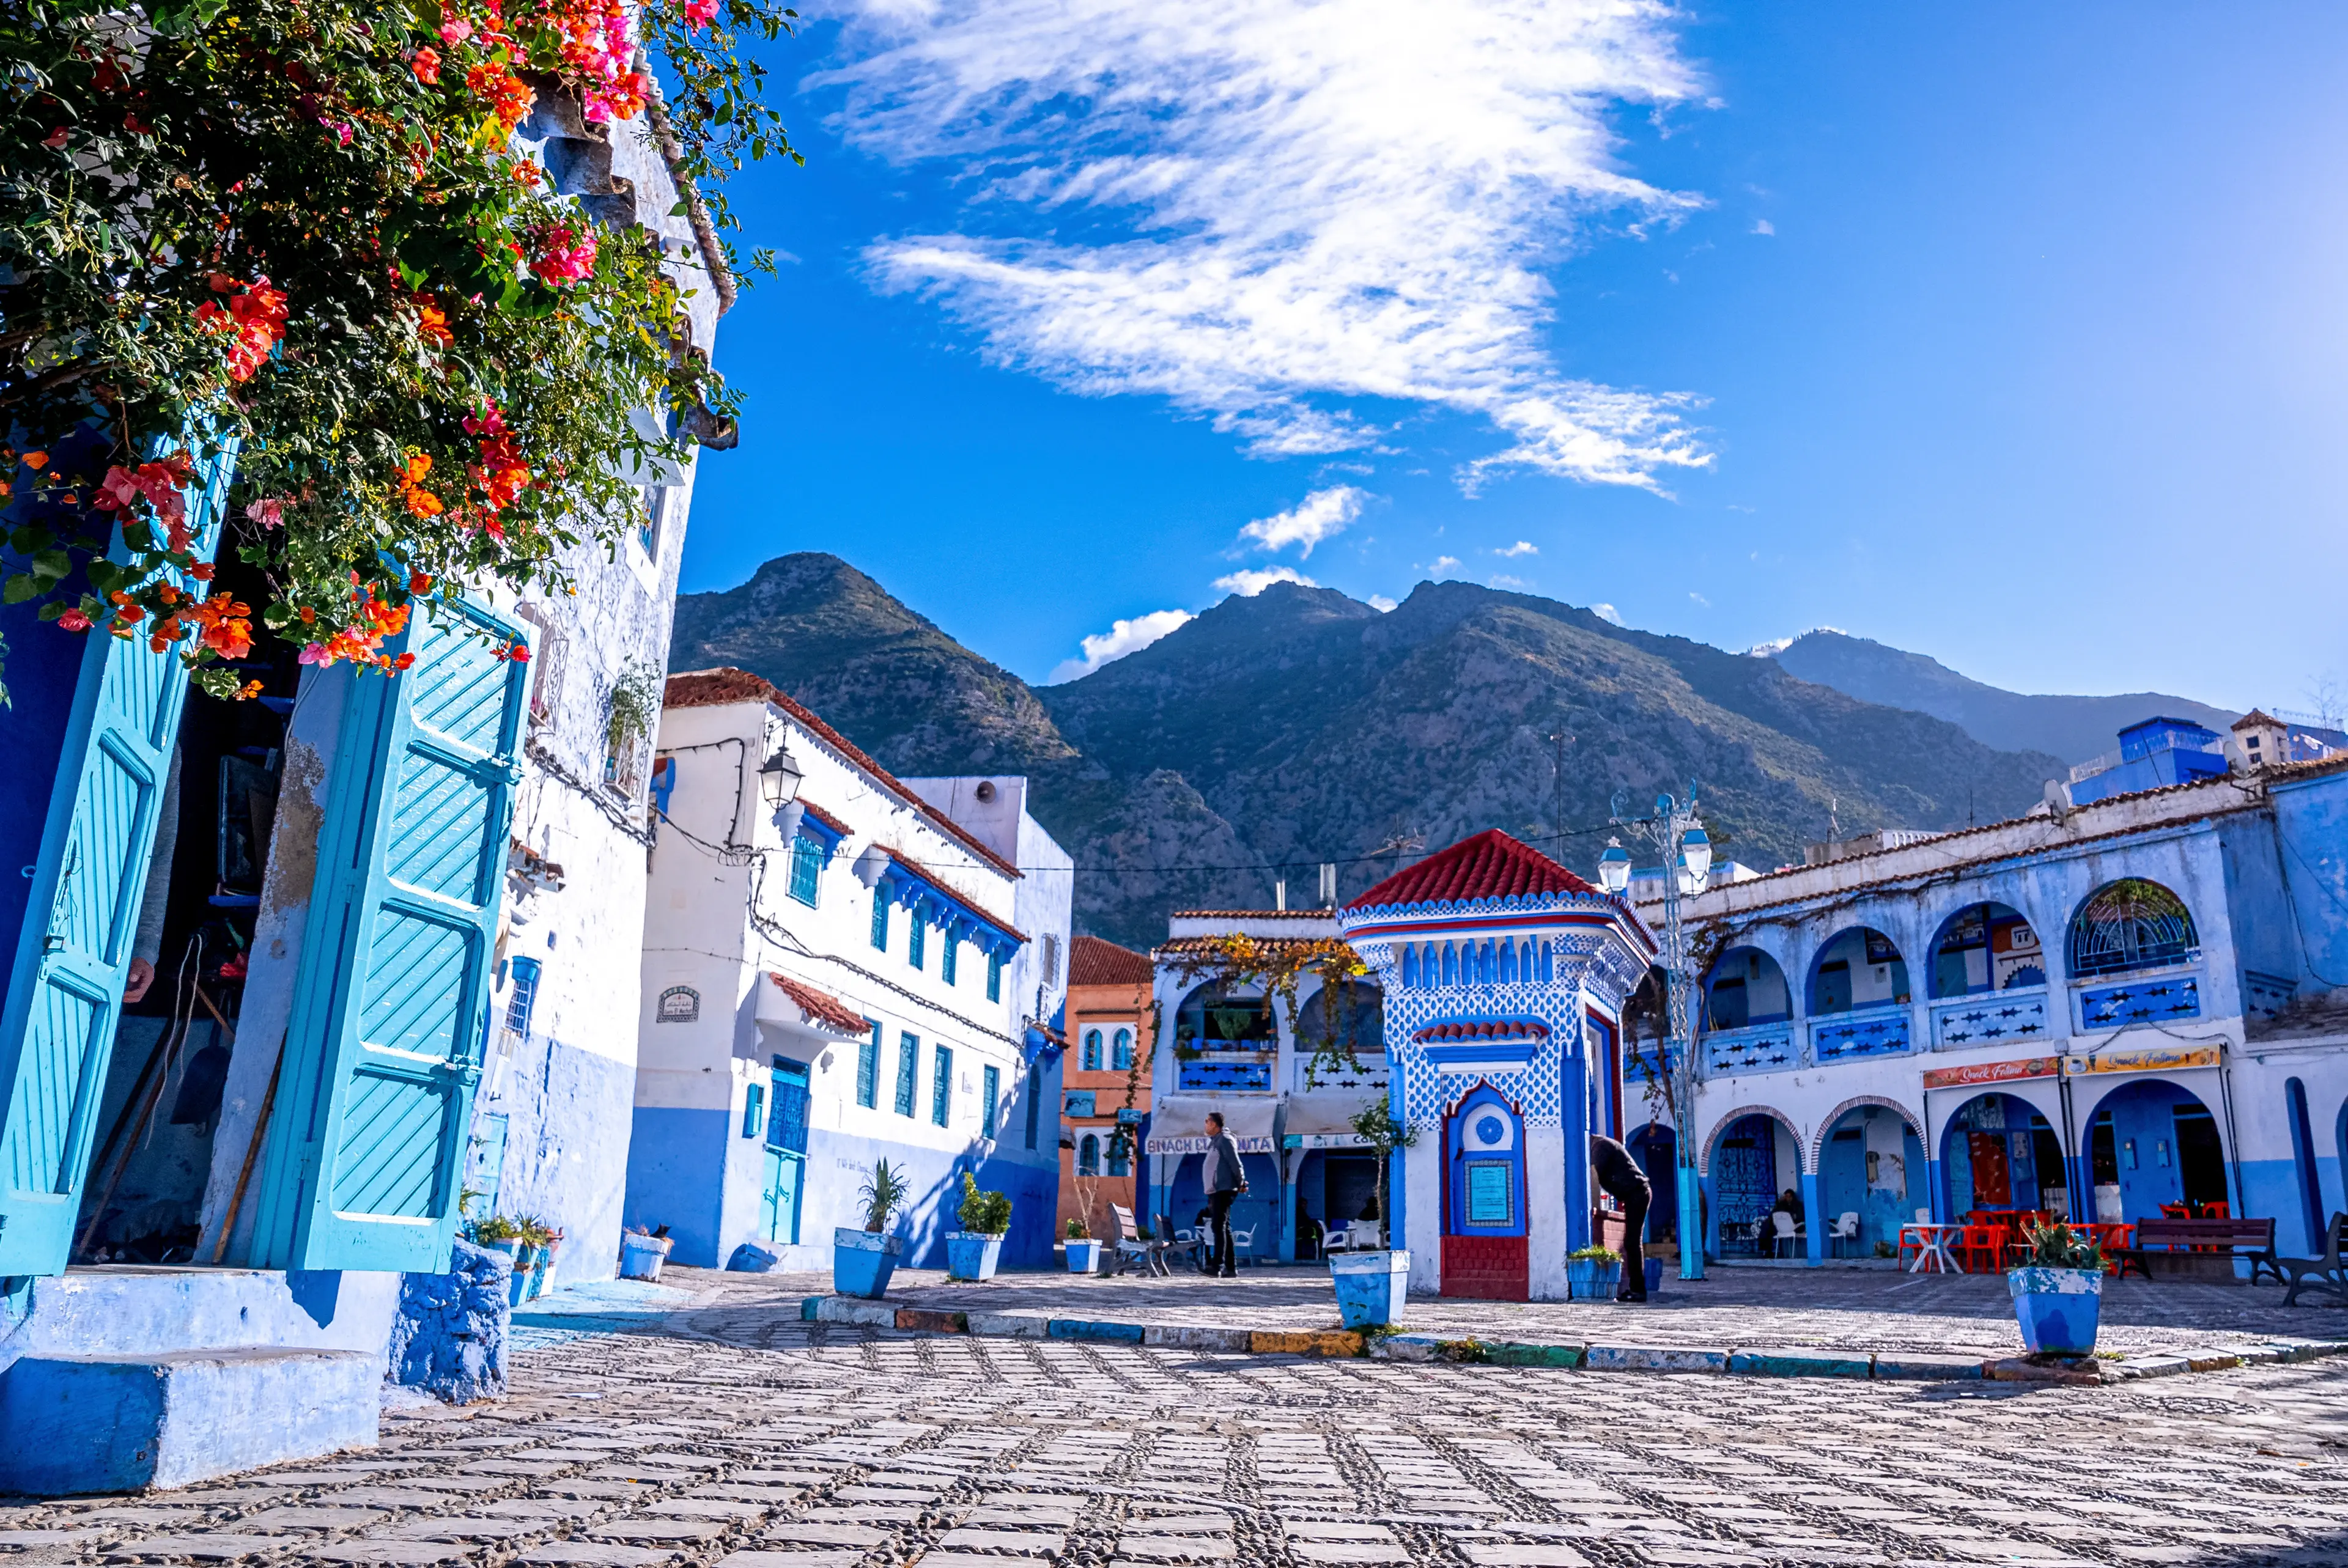 1-Day Family Adventure: Hidden Gems in Chefchaouen, Morocco